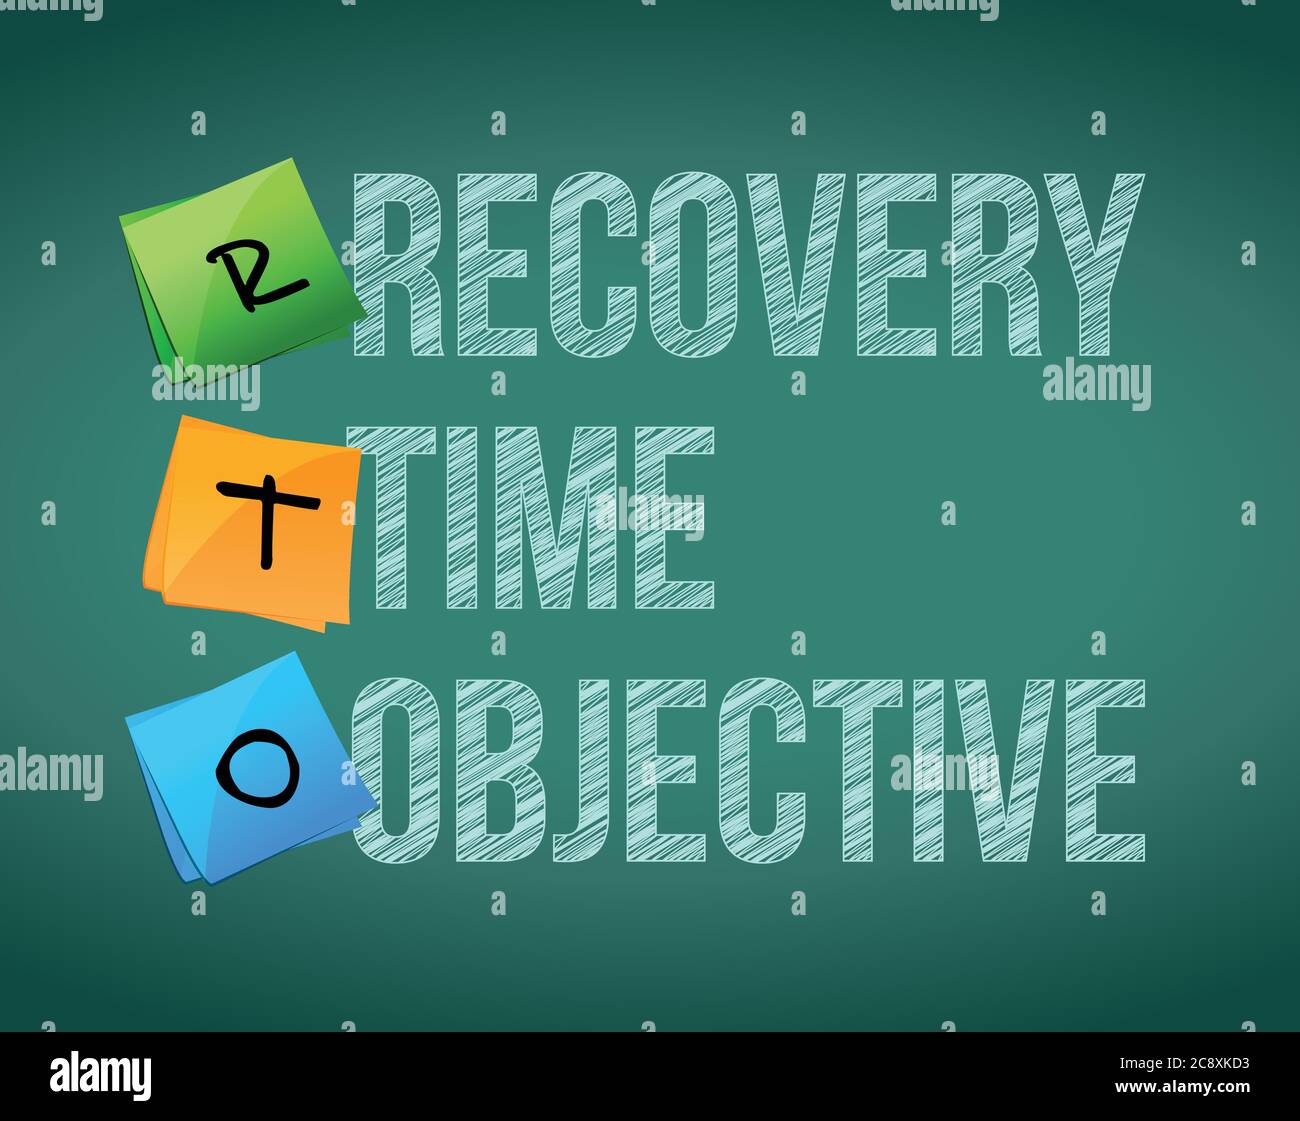 Post disaster recovery Stock Vector Images - Alamy